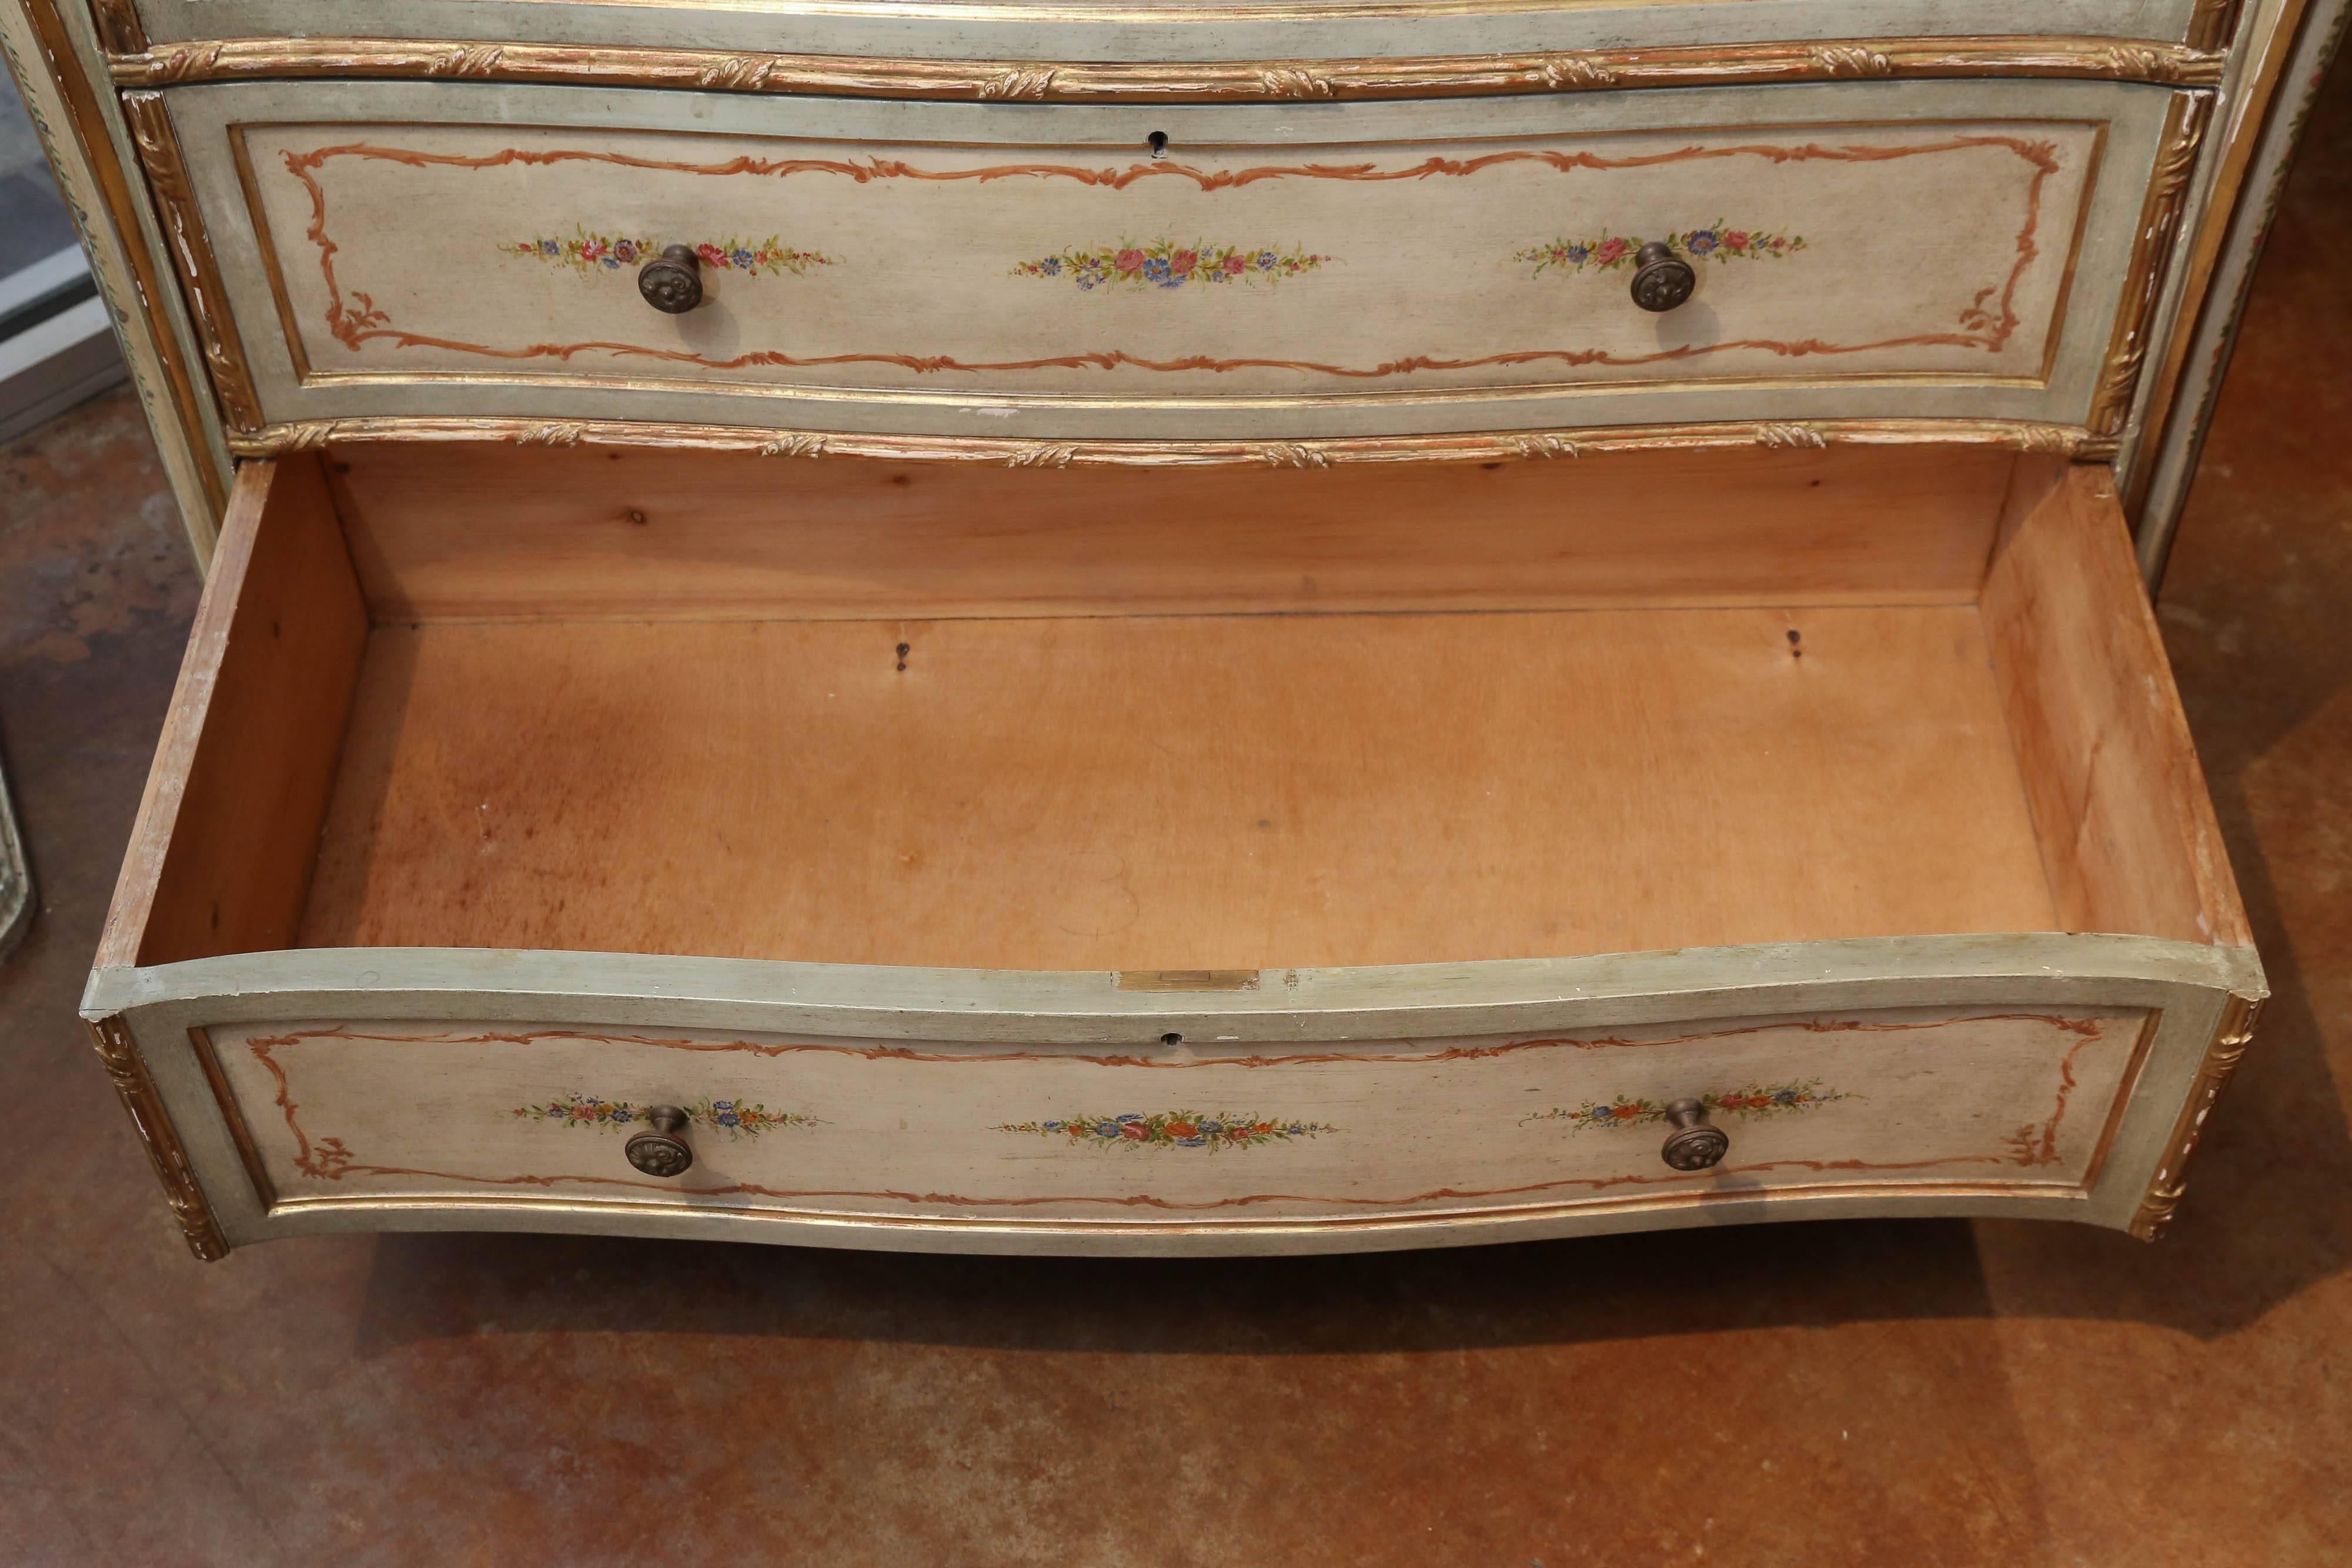 20th Century French Louis XV Style Floral Painted Chest 19th Century with Gilt Embellishment